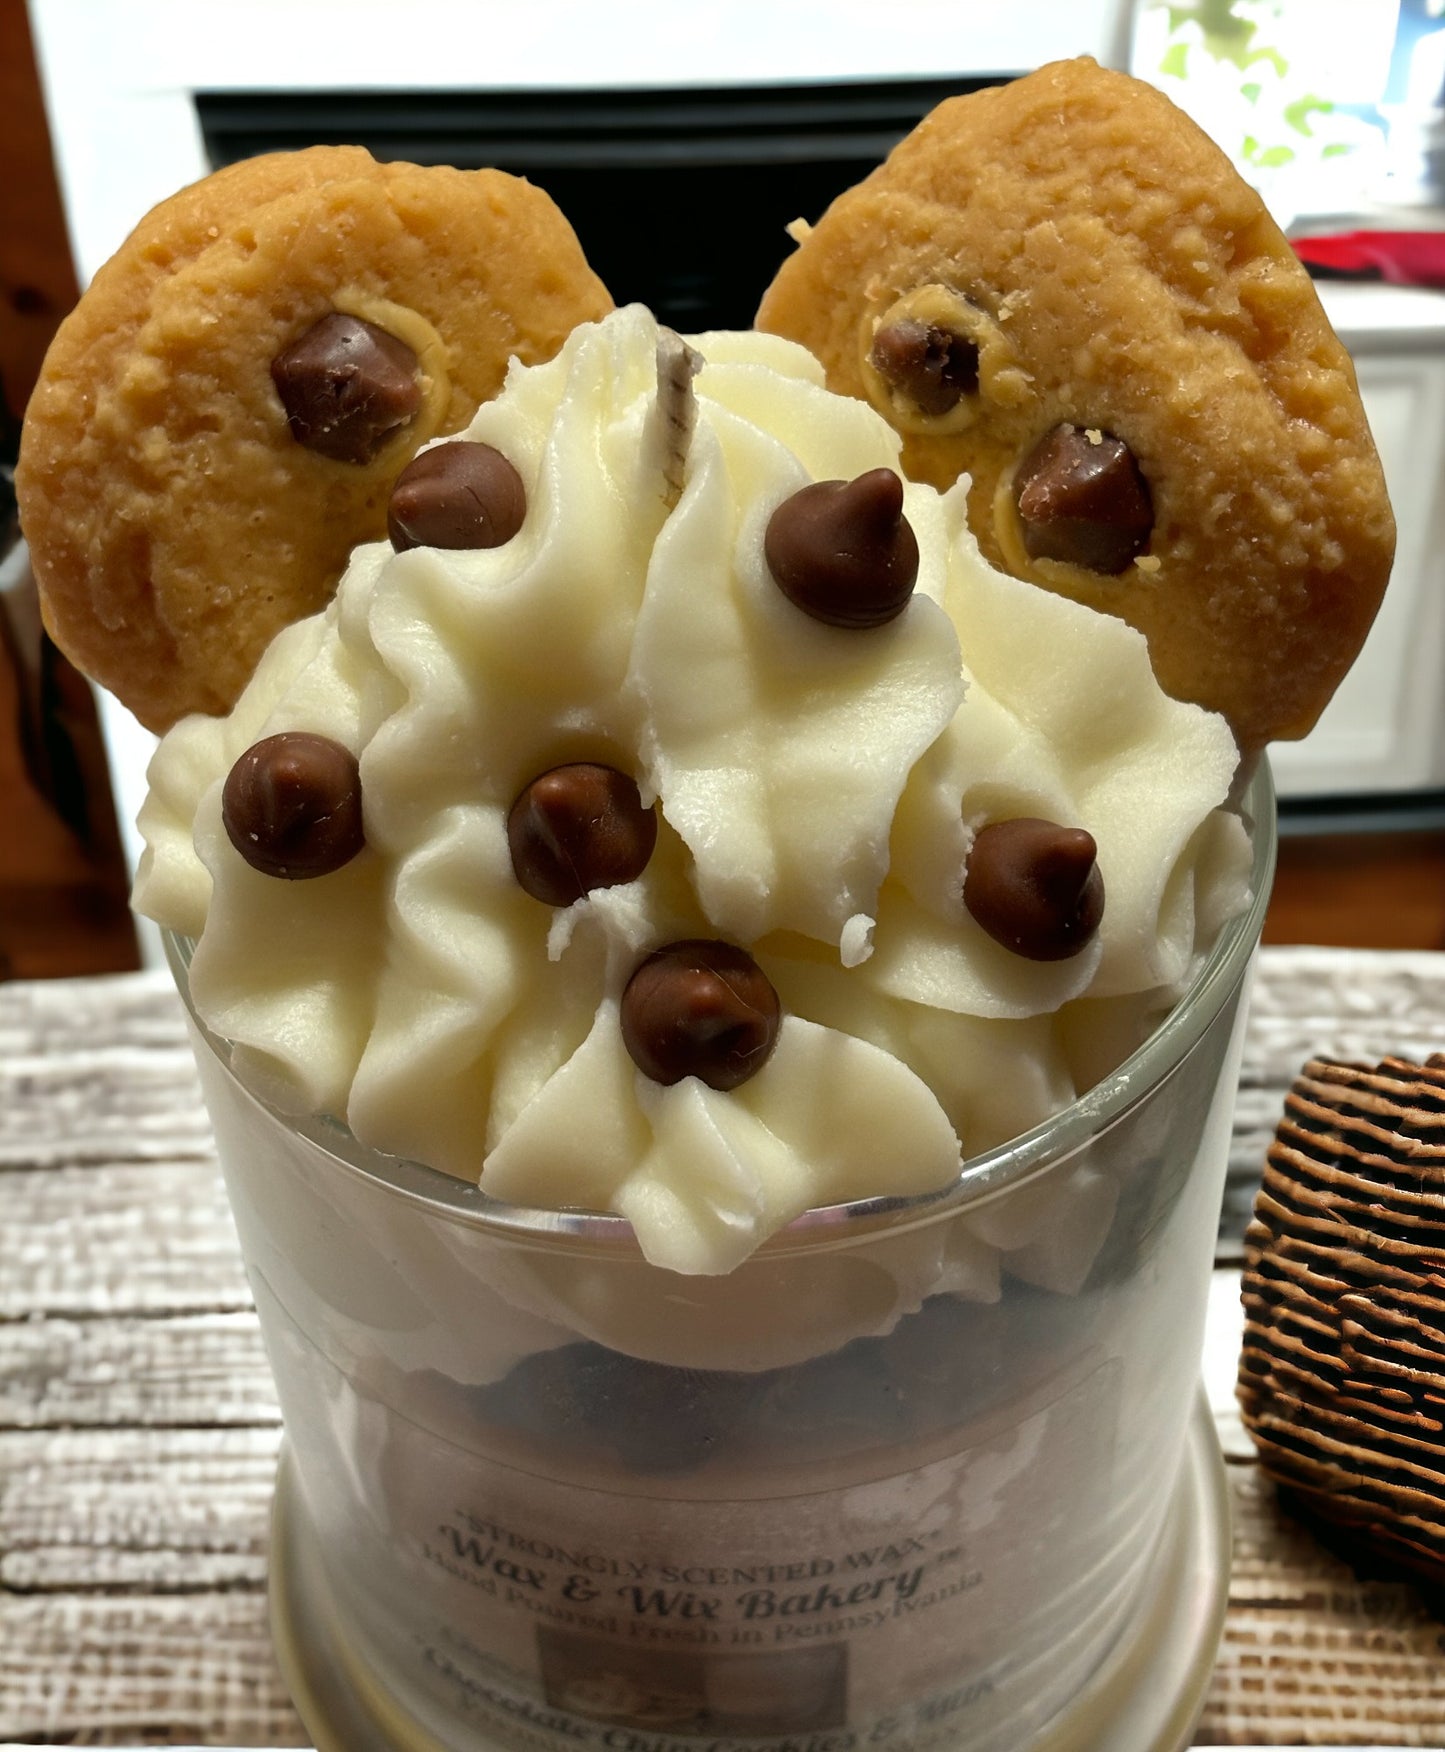 Chocolate Chip Cookie Candle. 13 oz. Soy Candle/Chocolate Chip Cookies/Chocolate Chips. Strongly Scented Candle